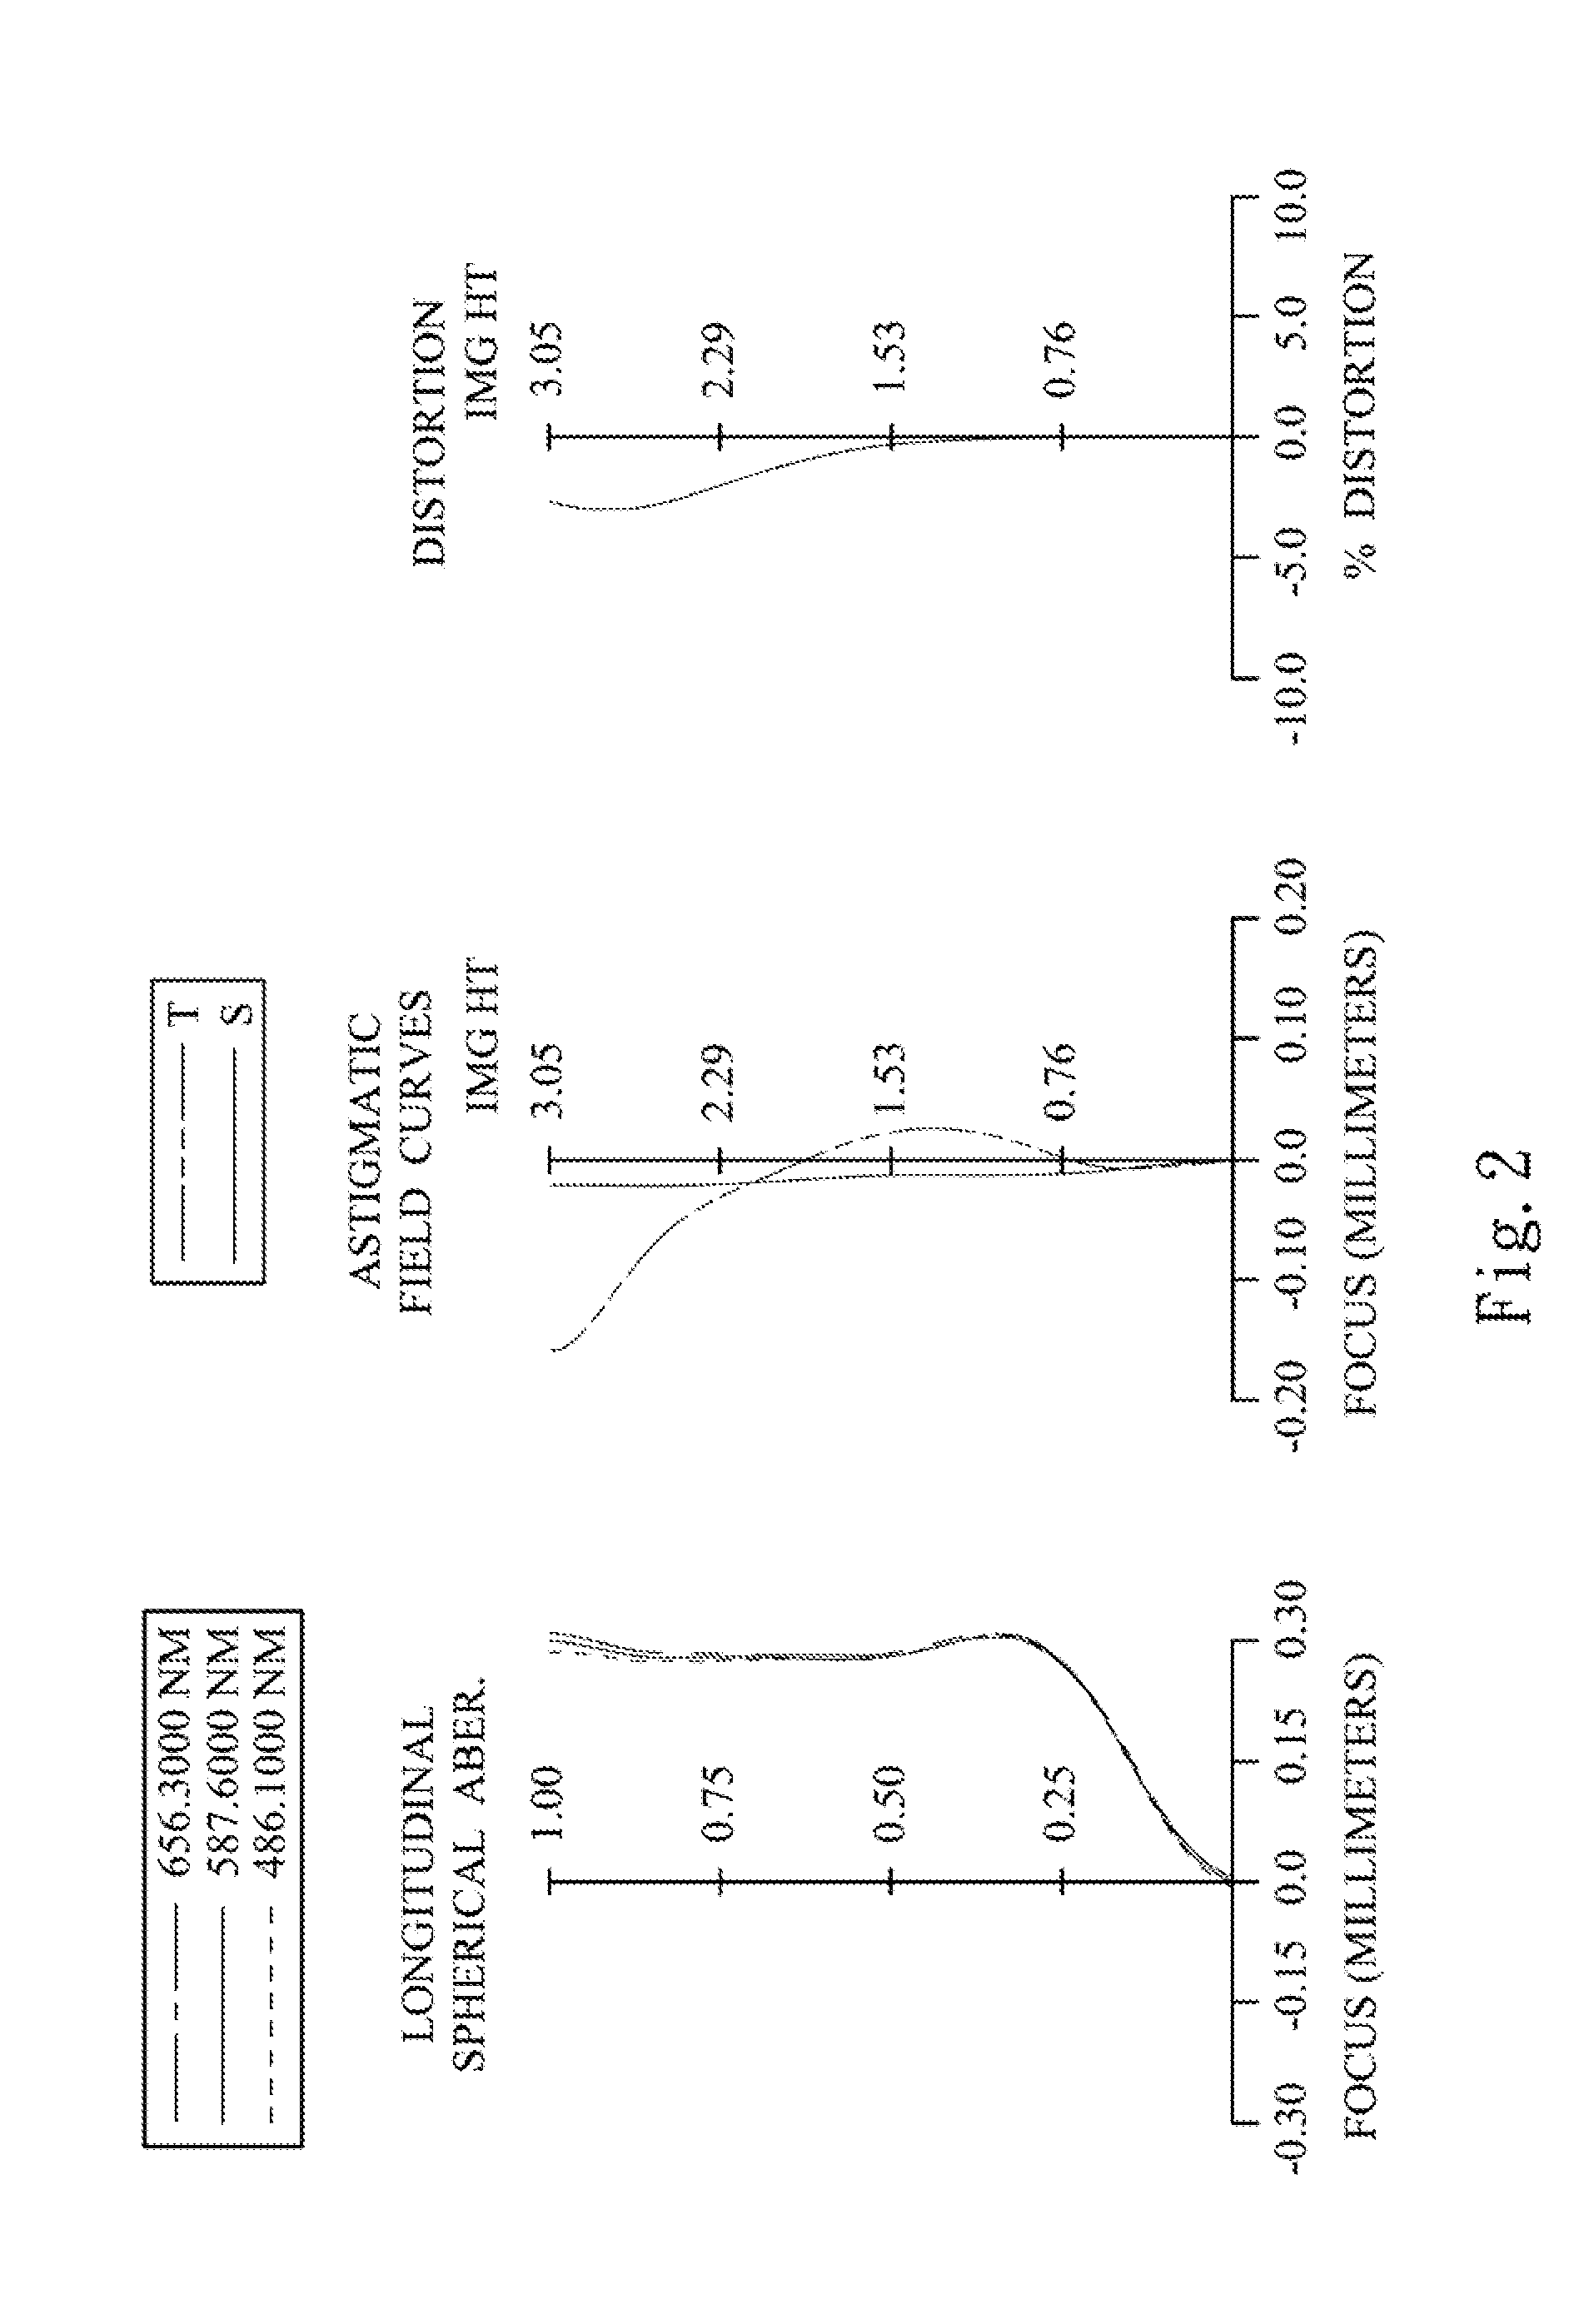 Wide-angle optical lens assembly